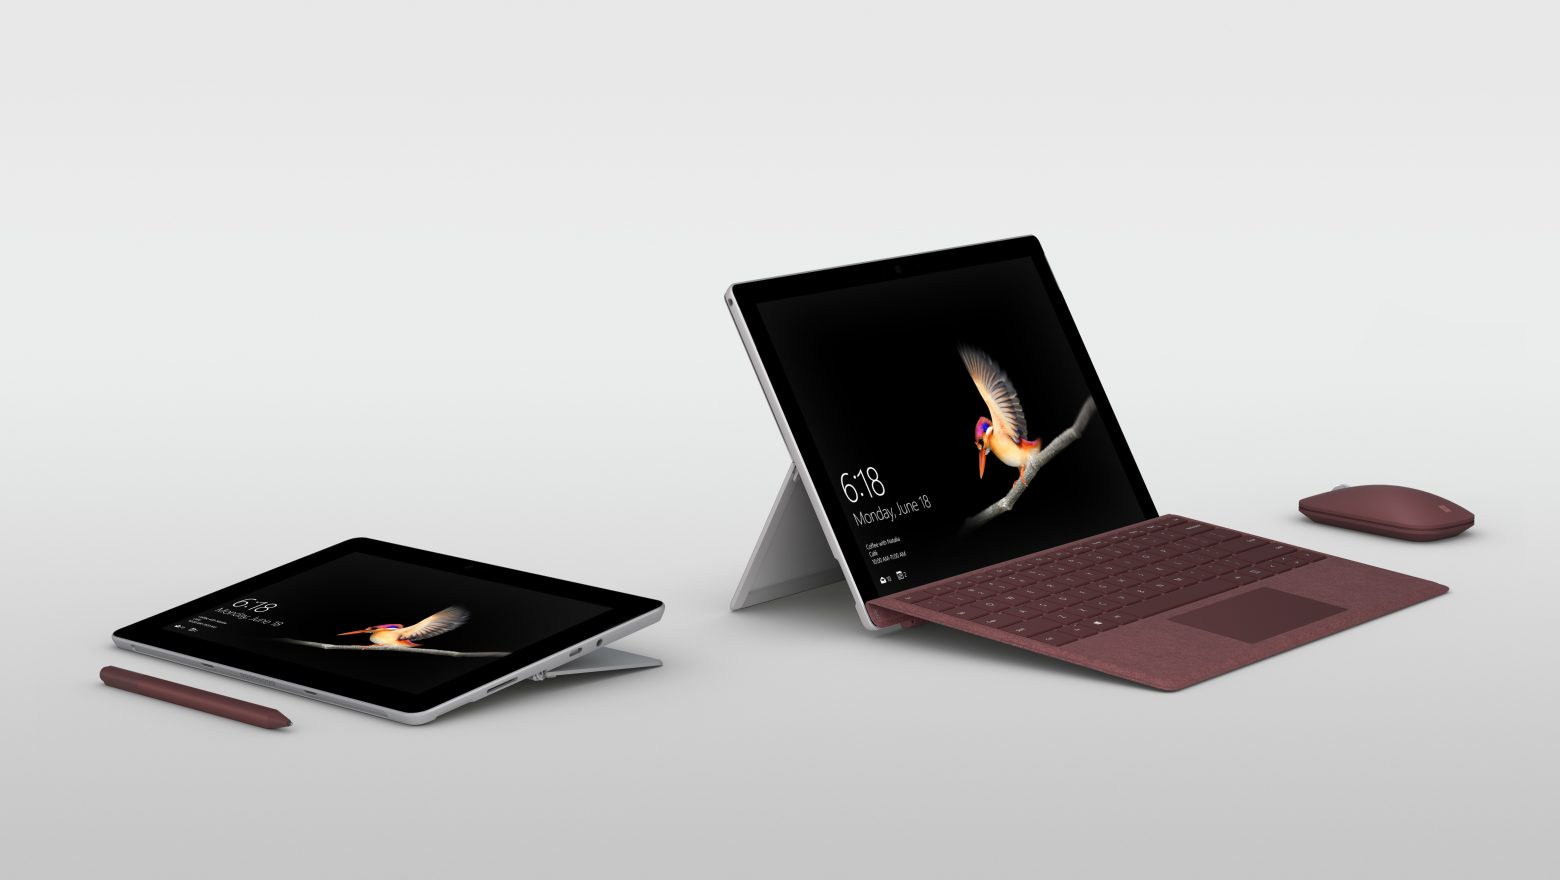 Surface Go and Type Cover